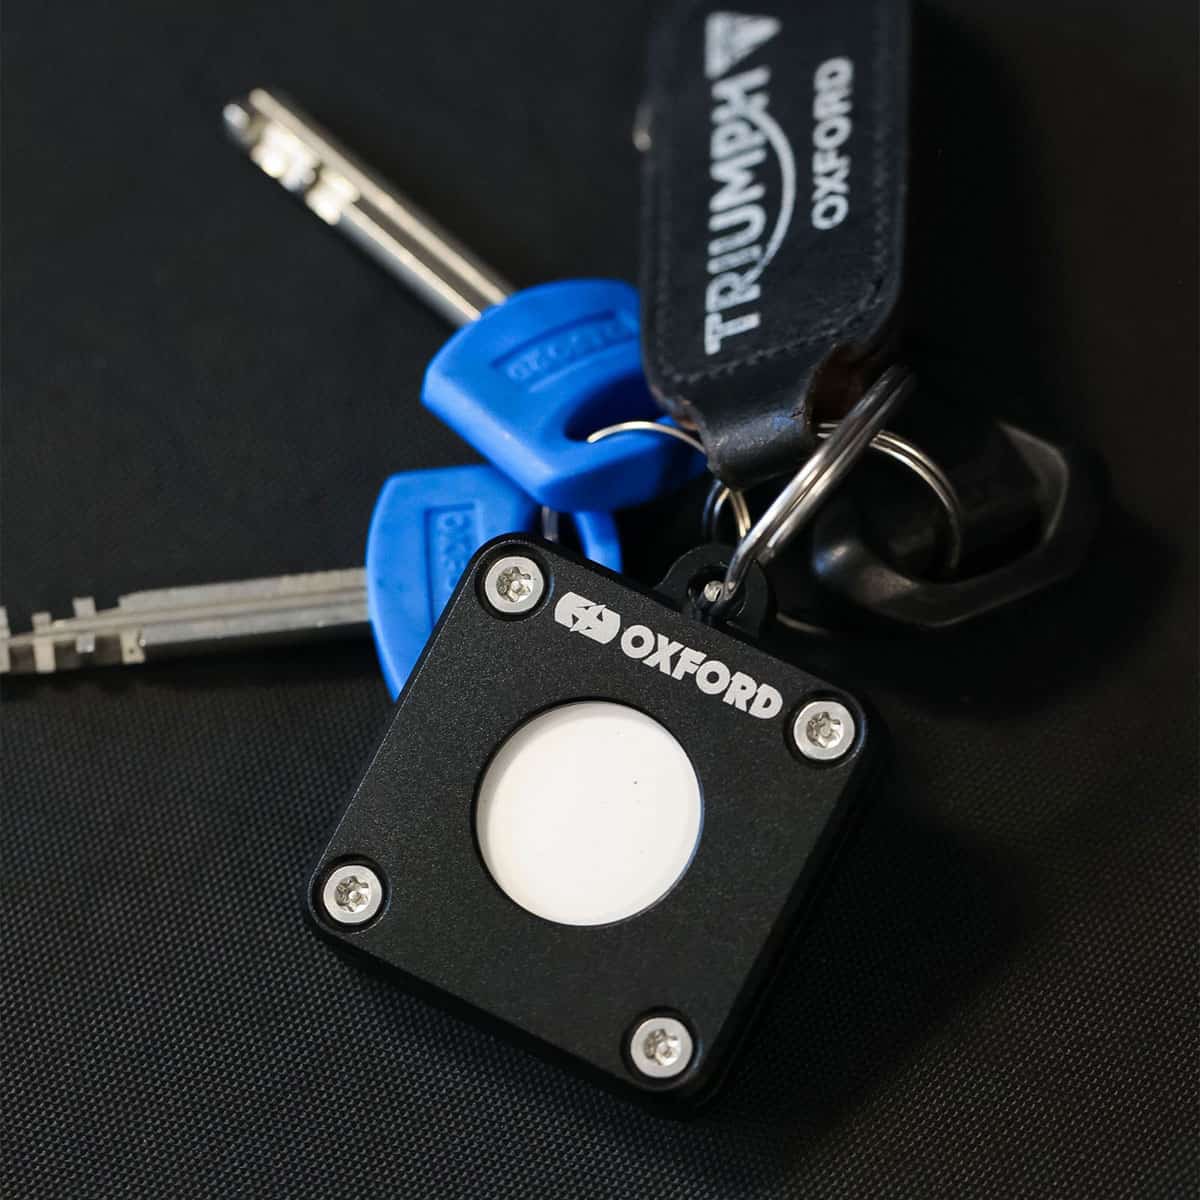 Oxford Universal Tag Mount AirTag Holder: Securely attach a tracker to your valuables